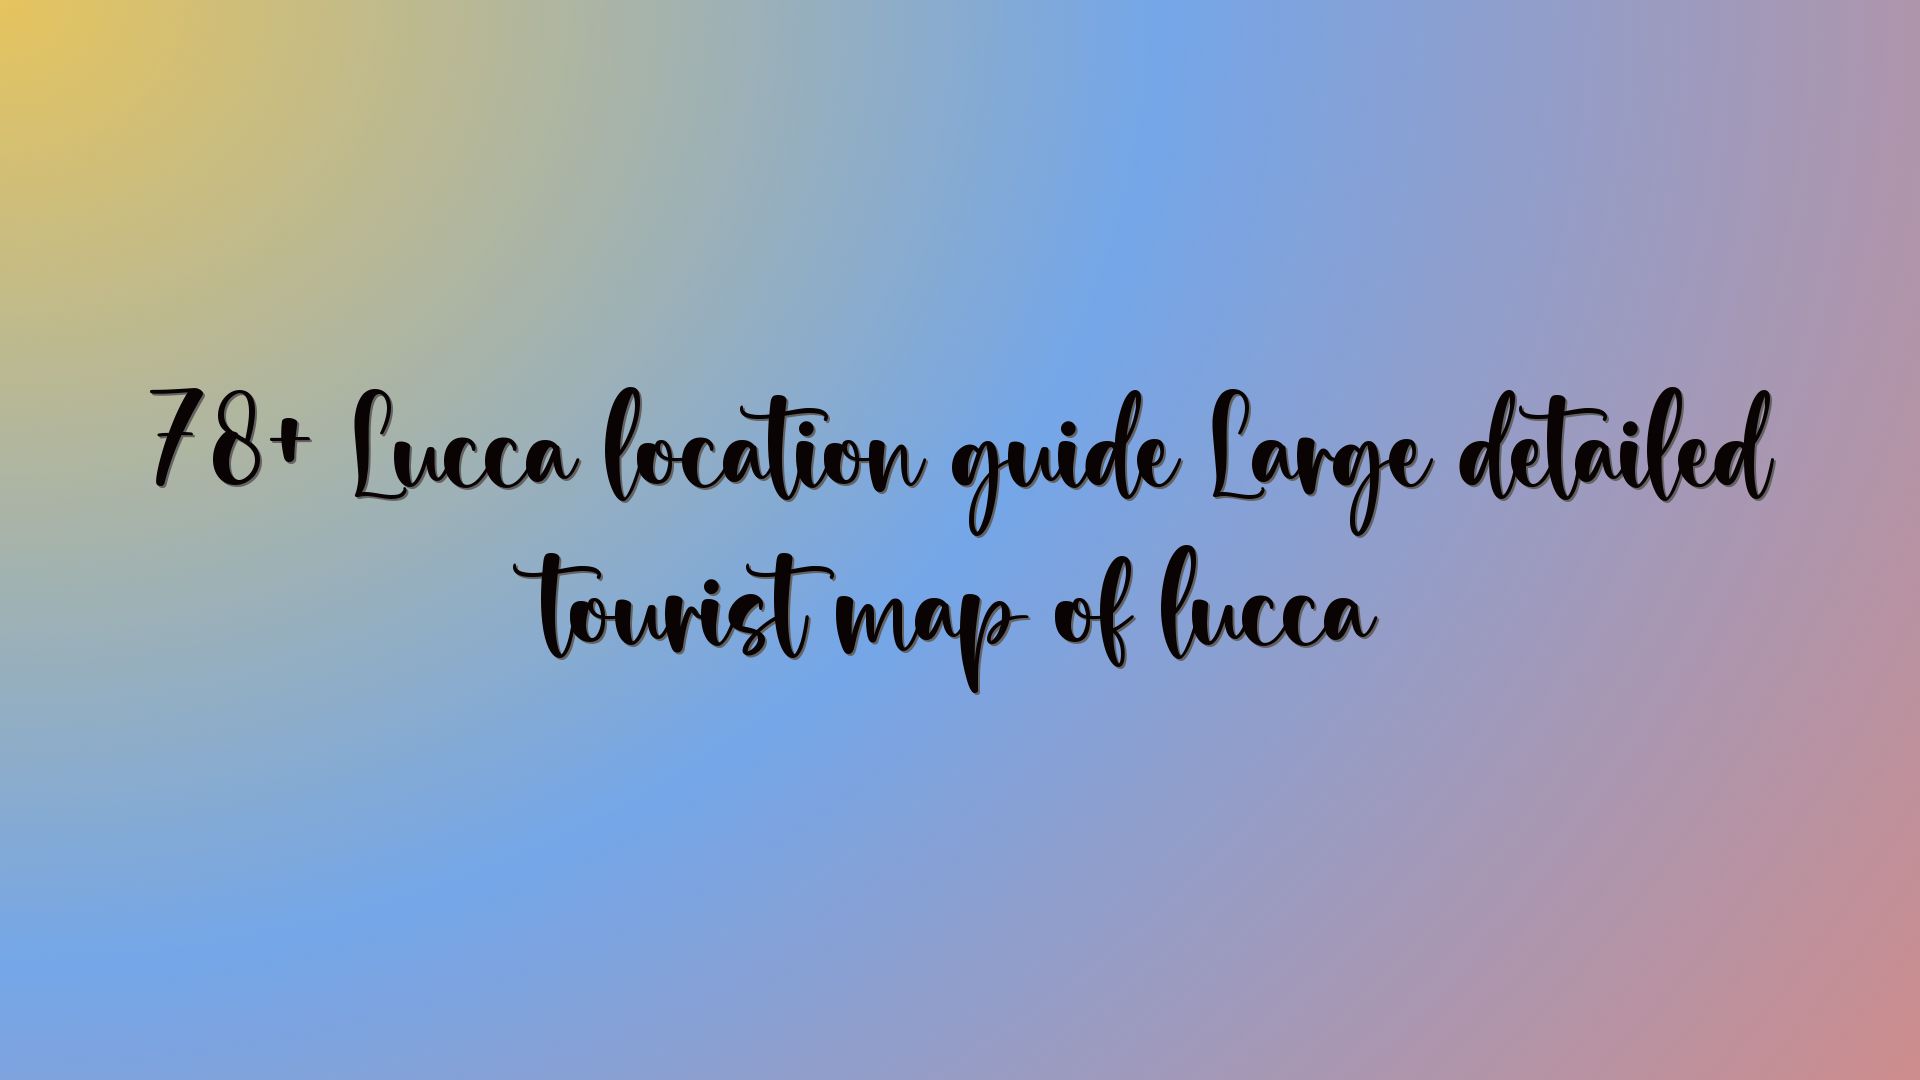 78+ Lucca location guide Large detailed tourist map of lucca